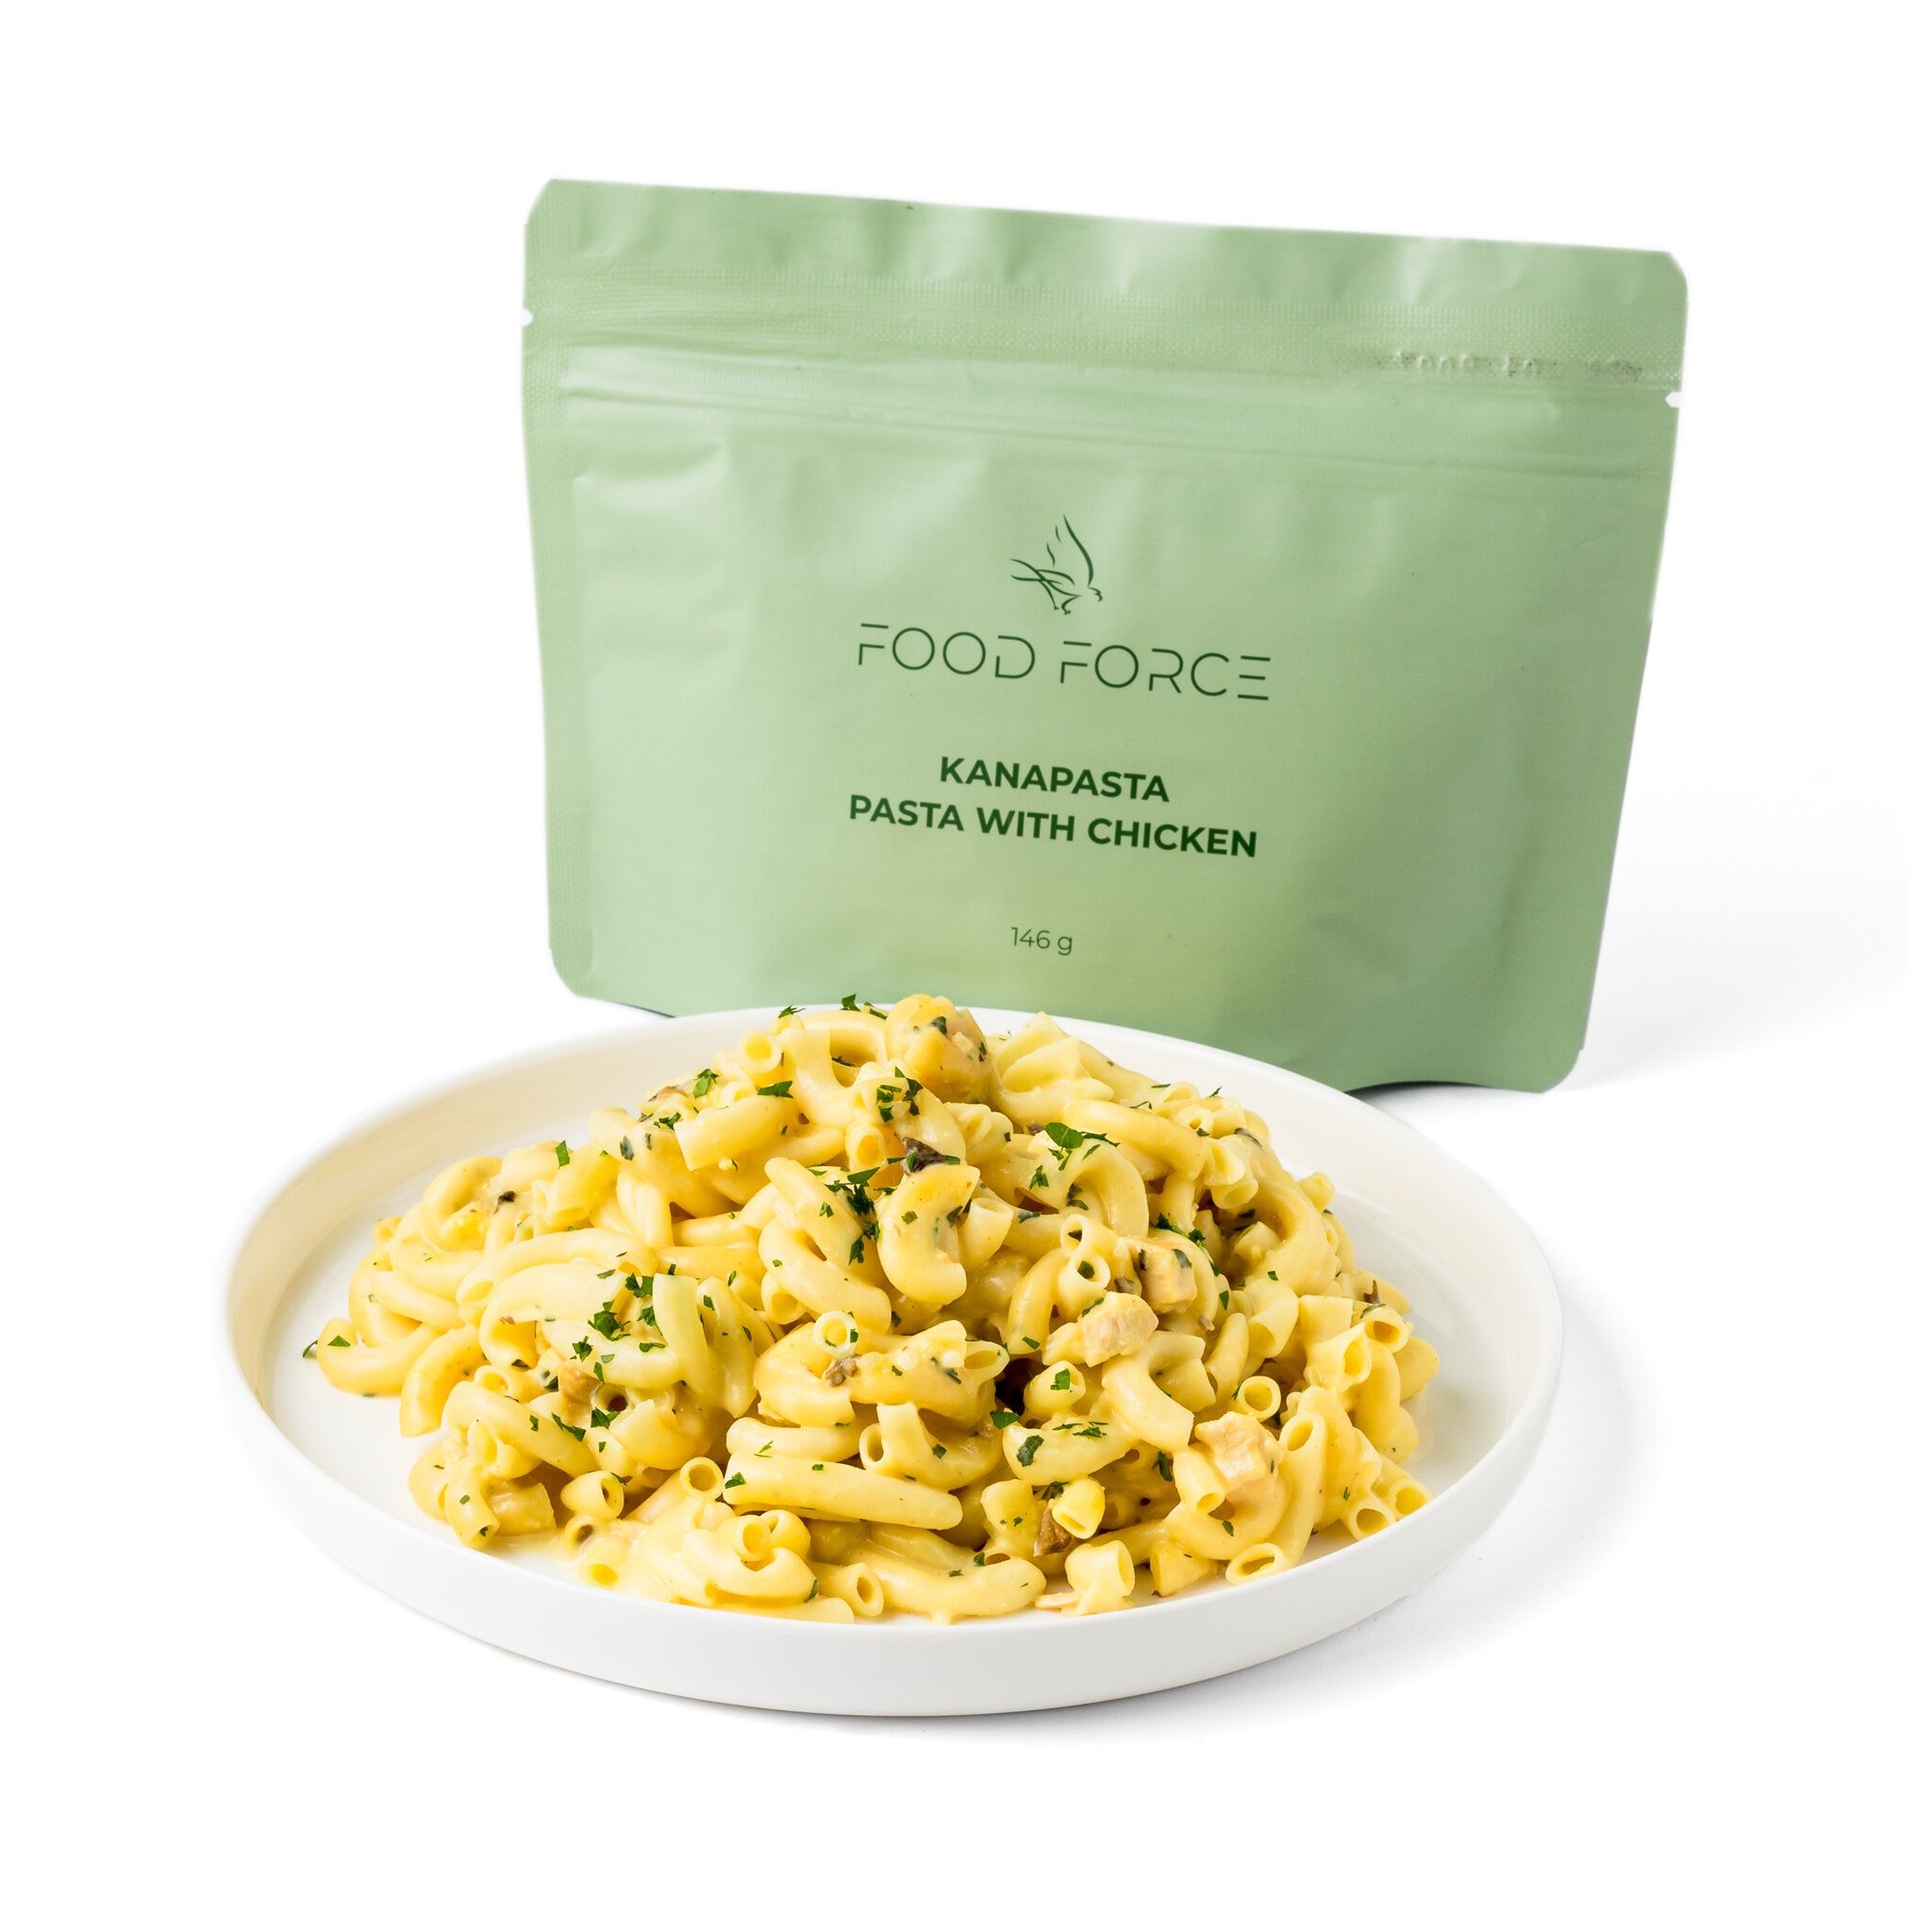 Food Force Pasta with chicken